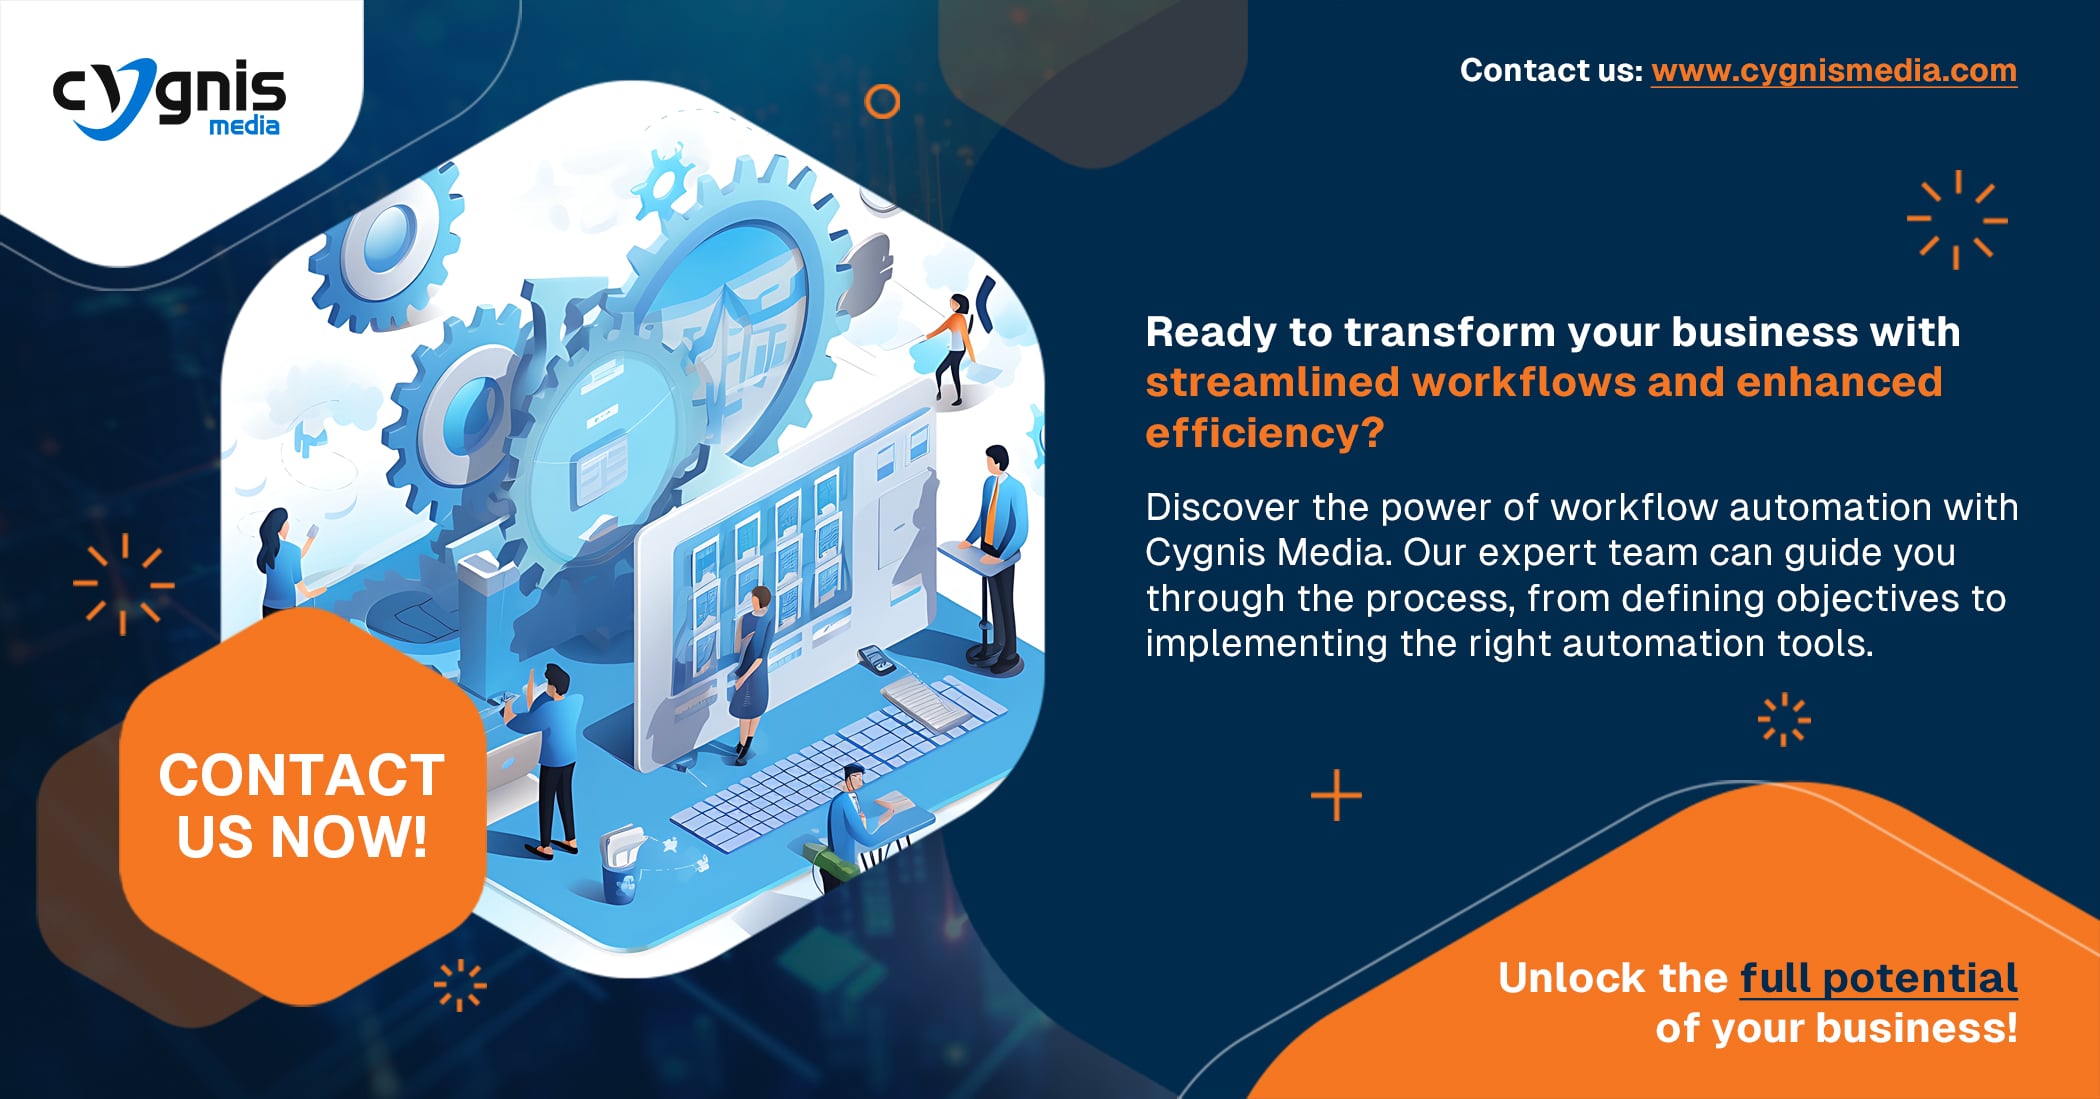 Ready to transform your business with streamlined workflows and enhanced efficiency? Contact us